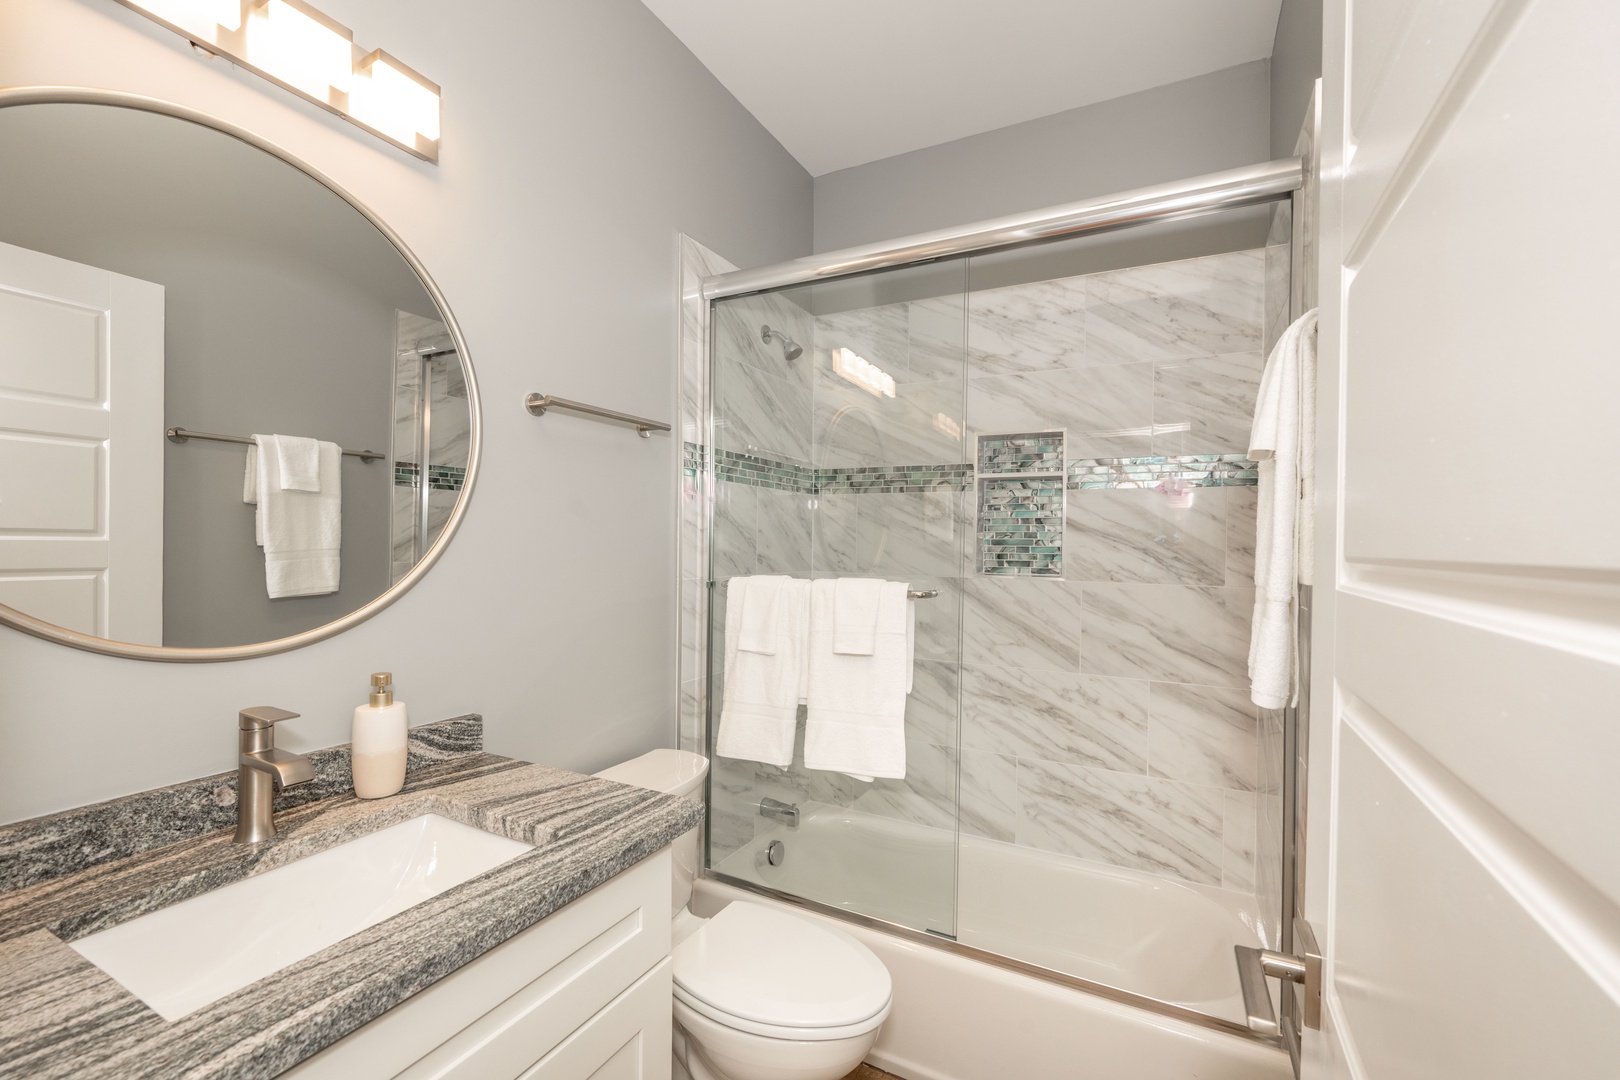 This home’s stylish full bath includes a single vanity & shower/tub combo